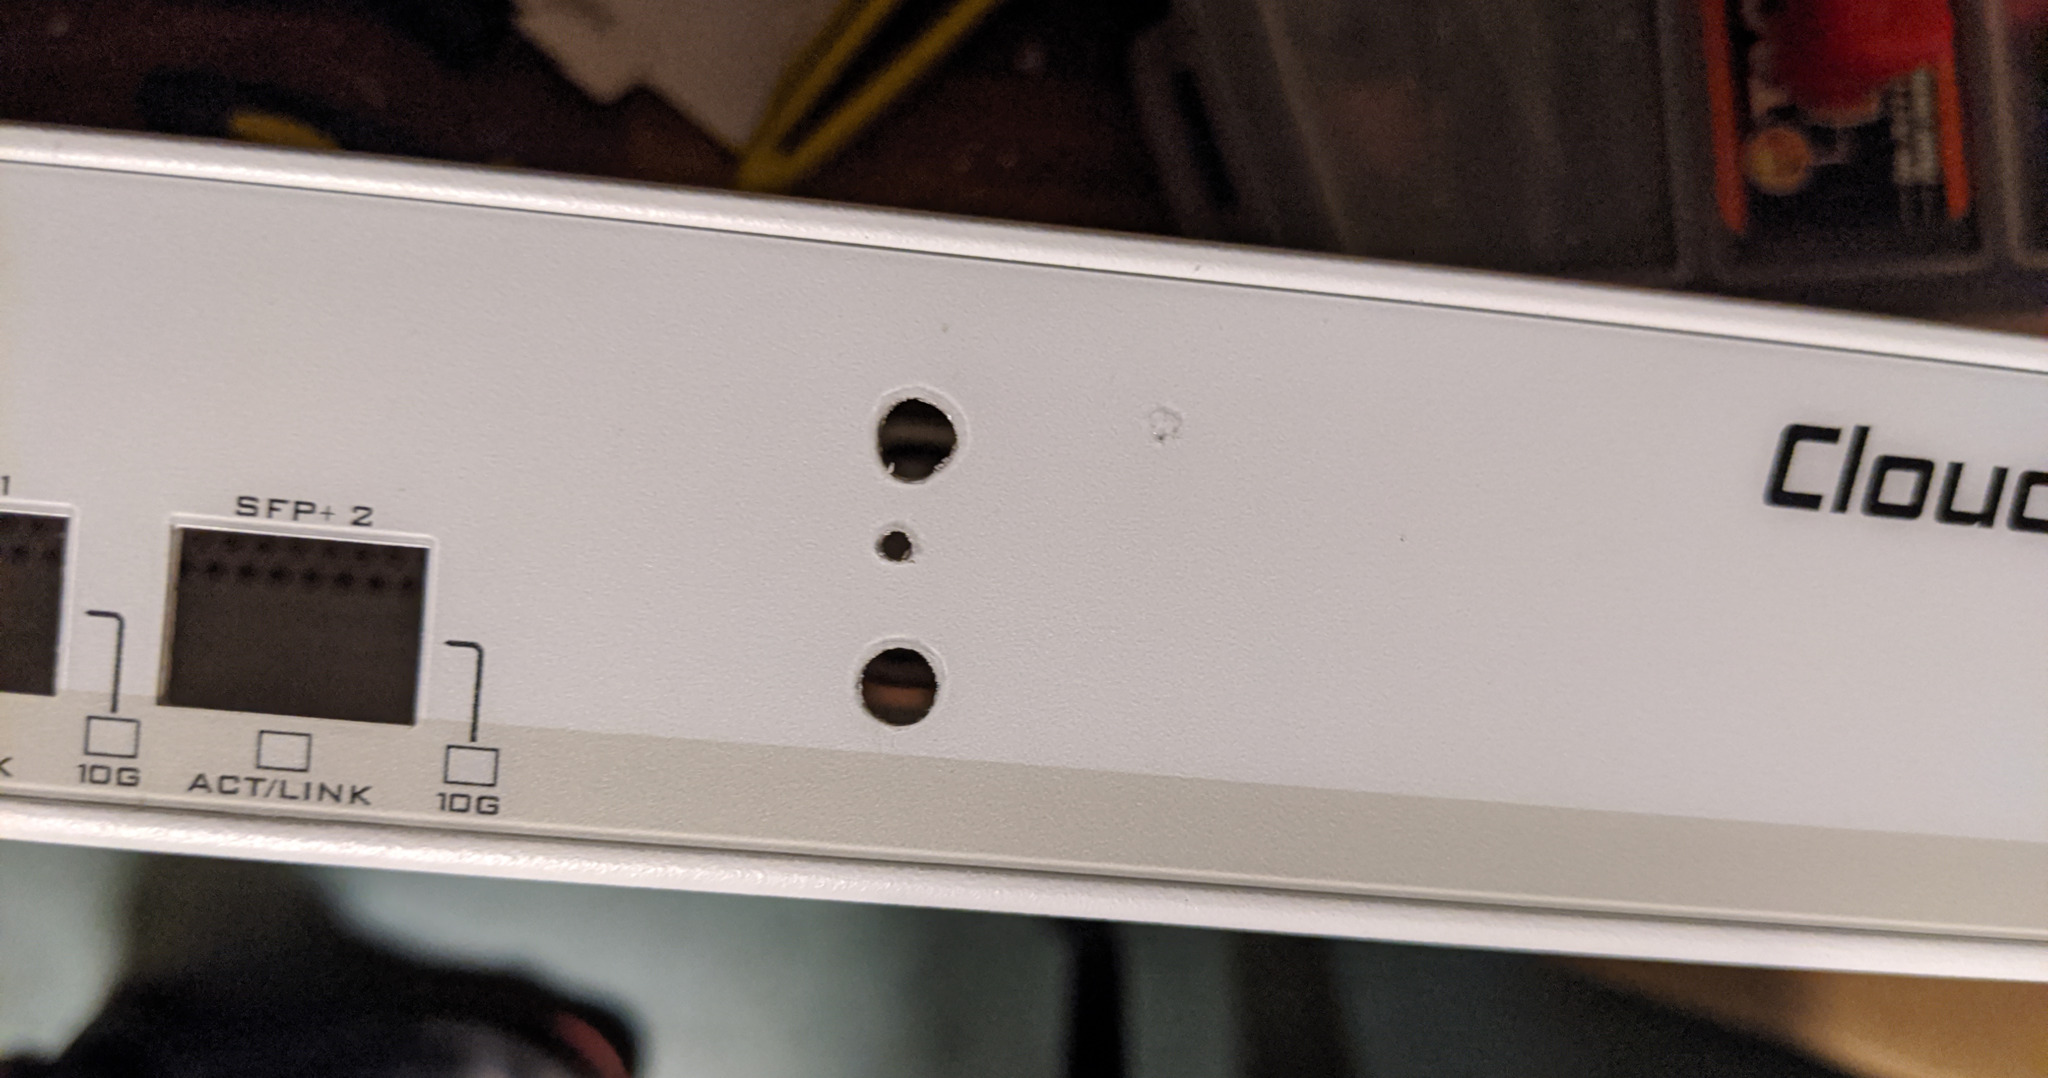 holes drilled to the front of the switch